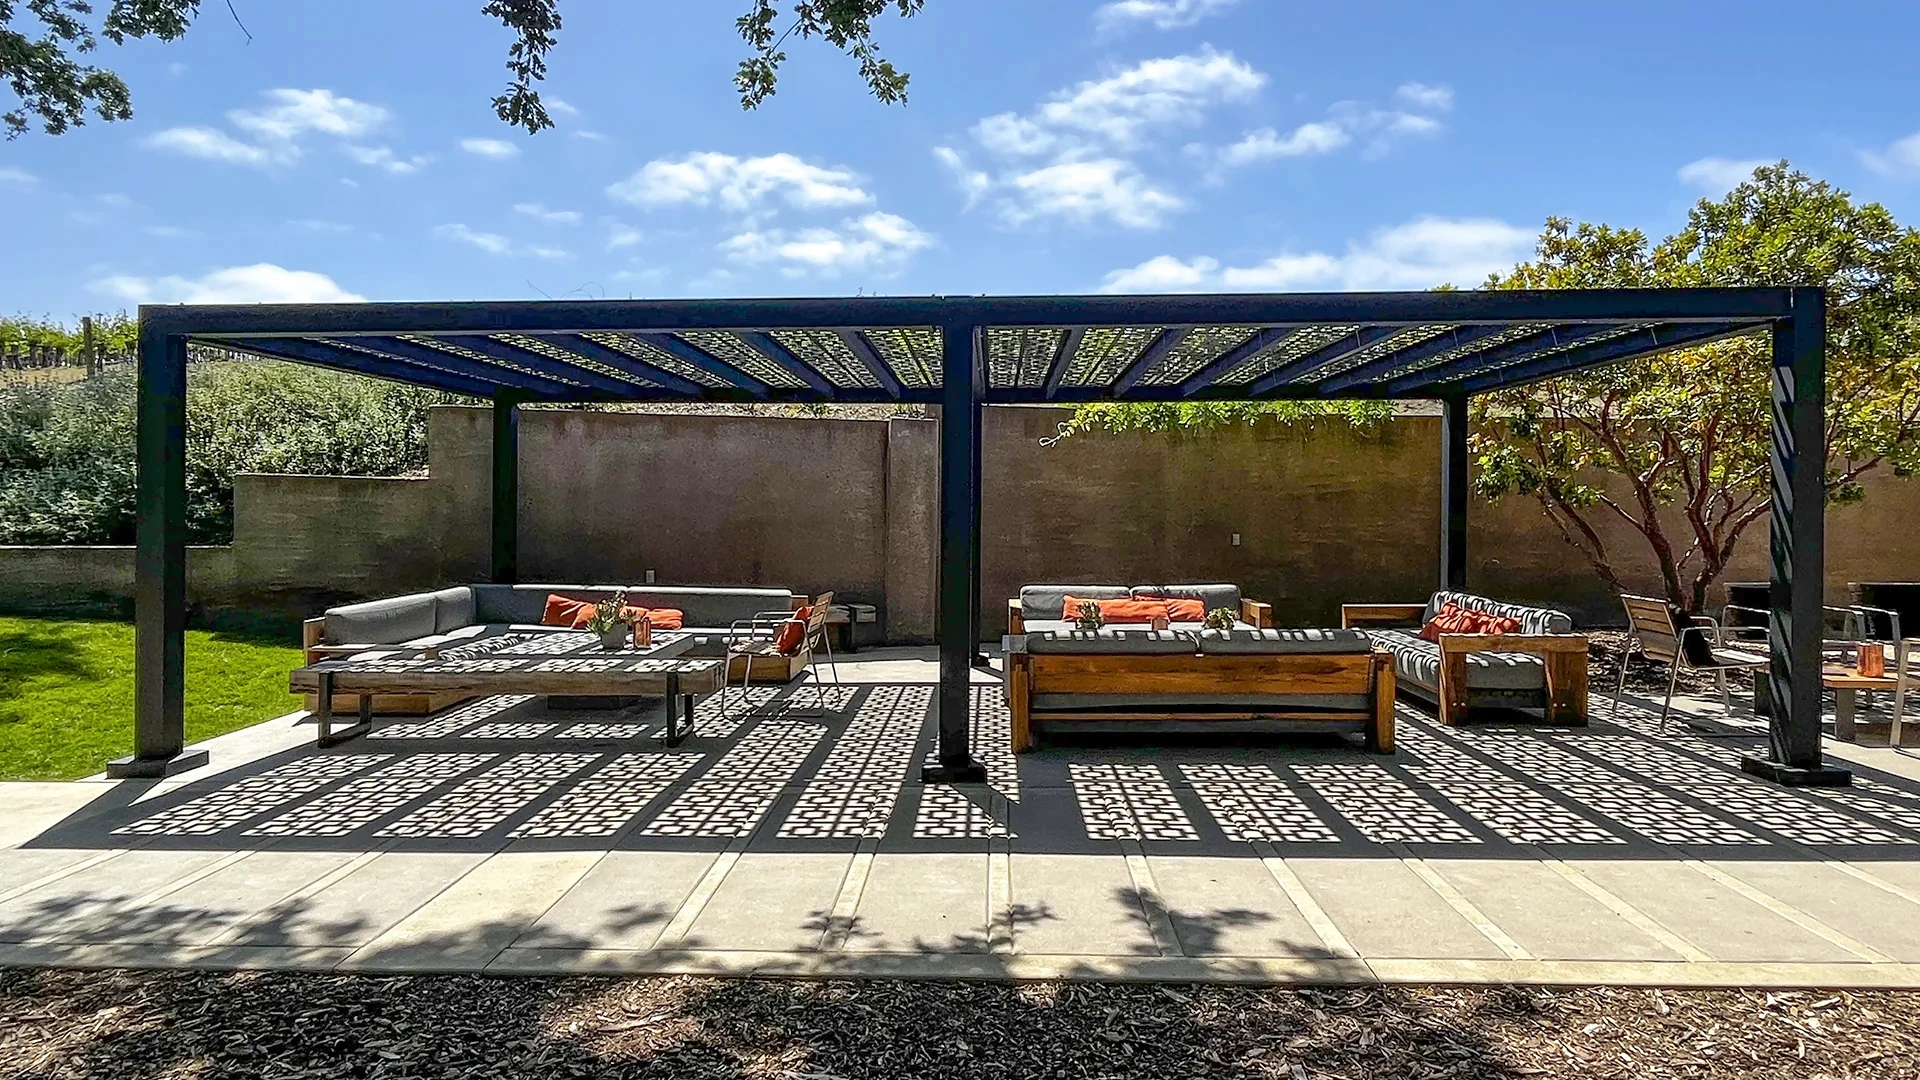 Featured image for “Brecon Estate Winery, CA”Brecon Estate Winery is a central California winery with a laid back Austrailian style. A tailored Trex Pergola Shadow, manufactured by Structureworks is used to provide respite from the sun as part of the outdoor tasting area.14491:full